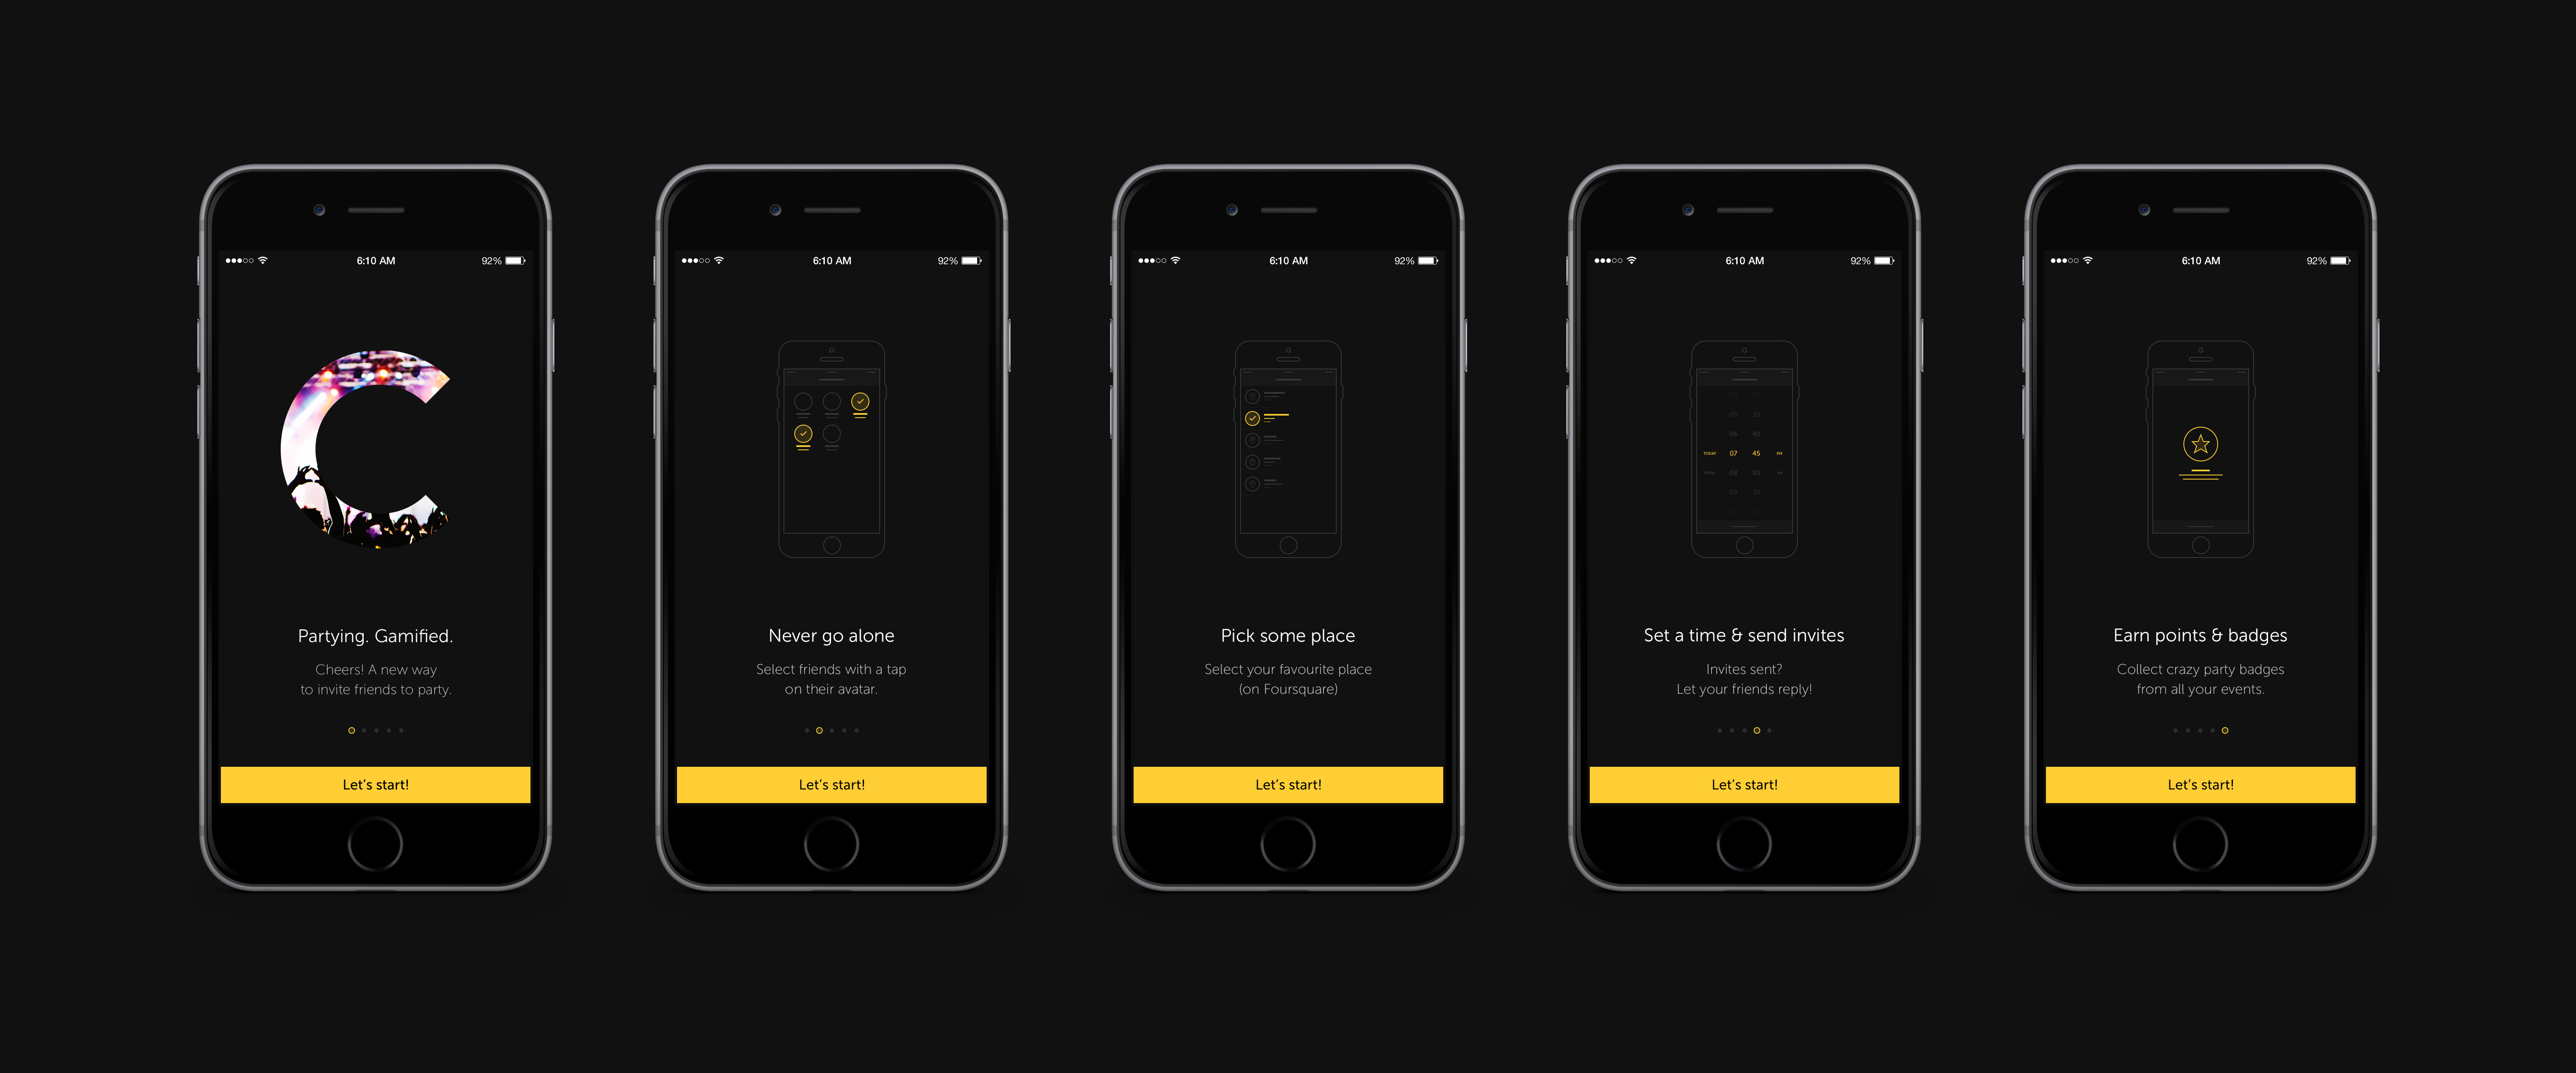 Cheers - Walkthrough by Ales Nesetril on Dribbble